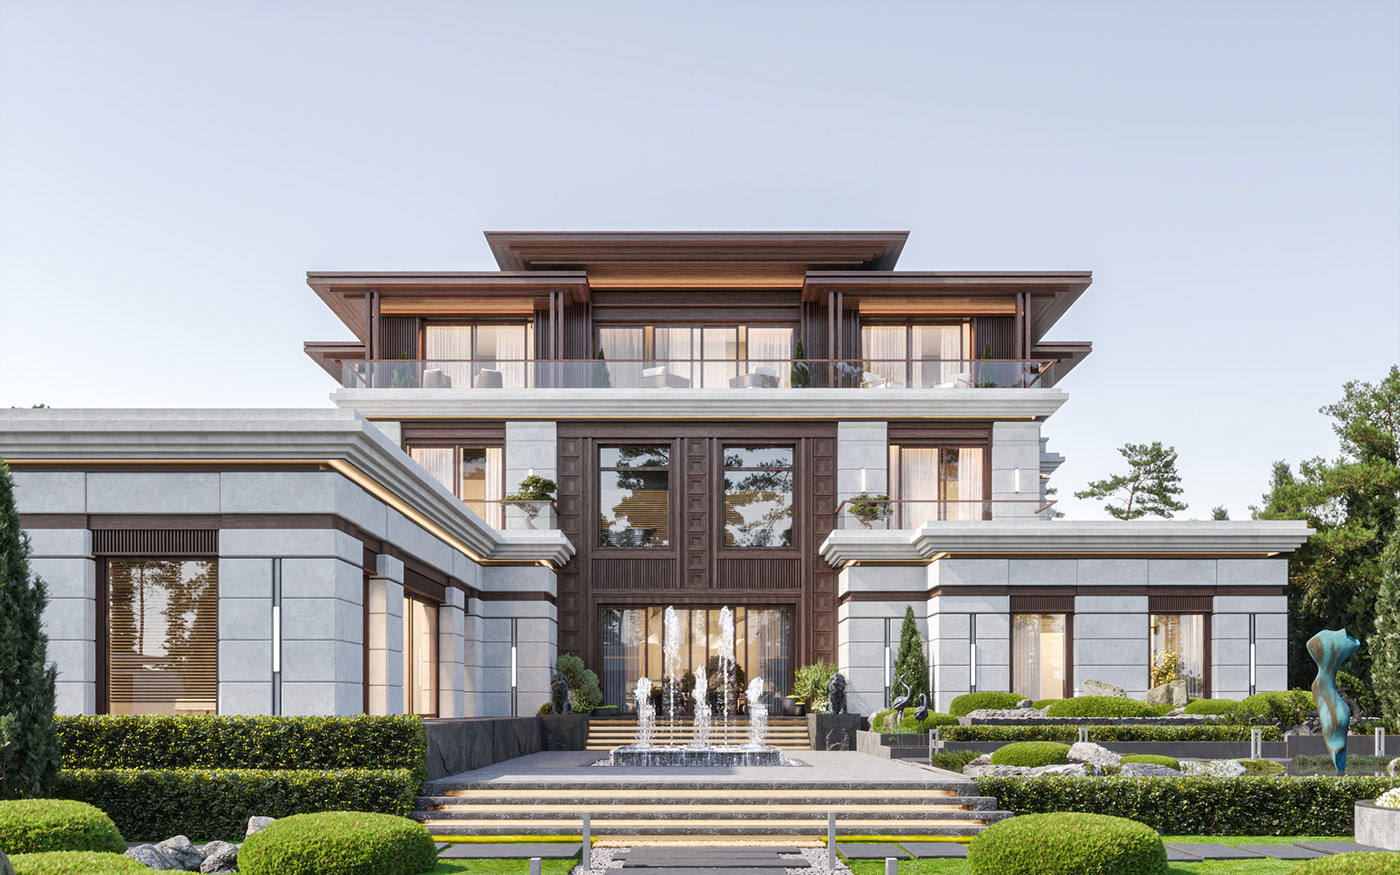 Residence house architecture exterior home design visualization corona Render architectural design